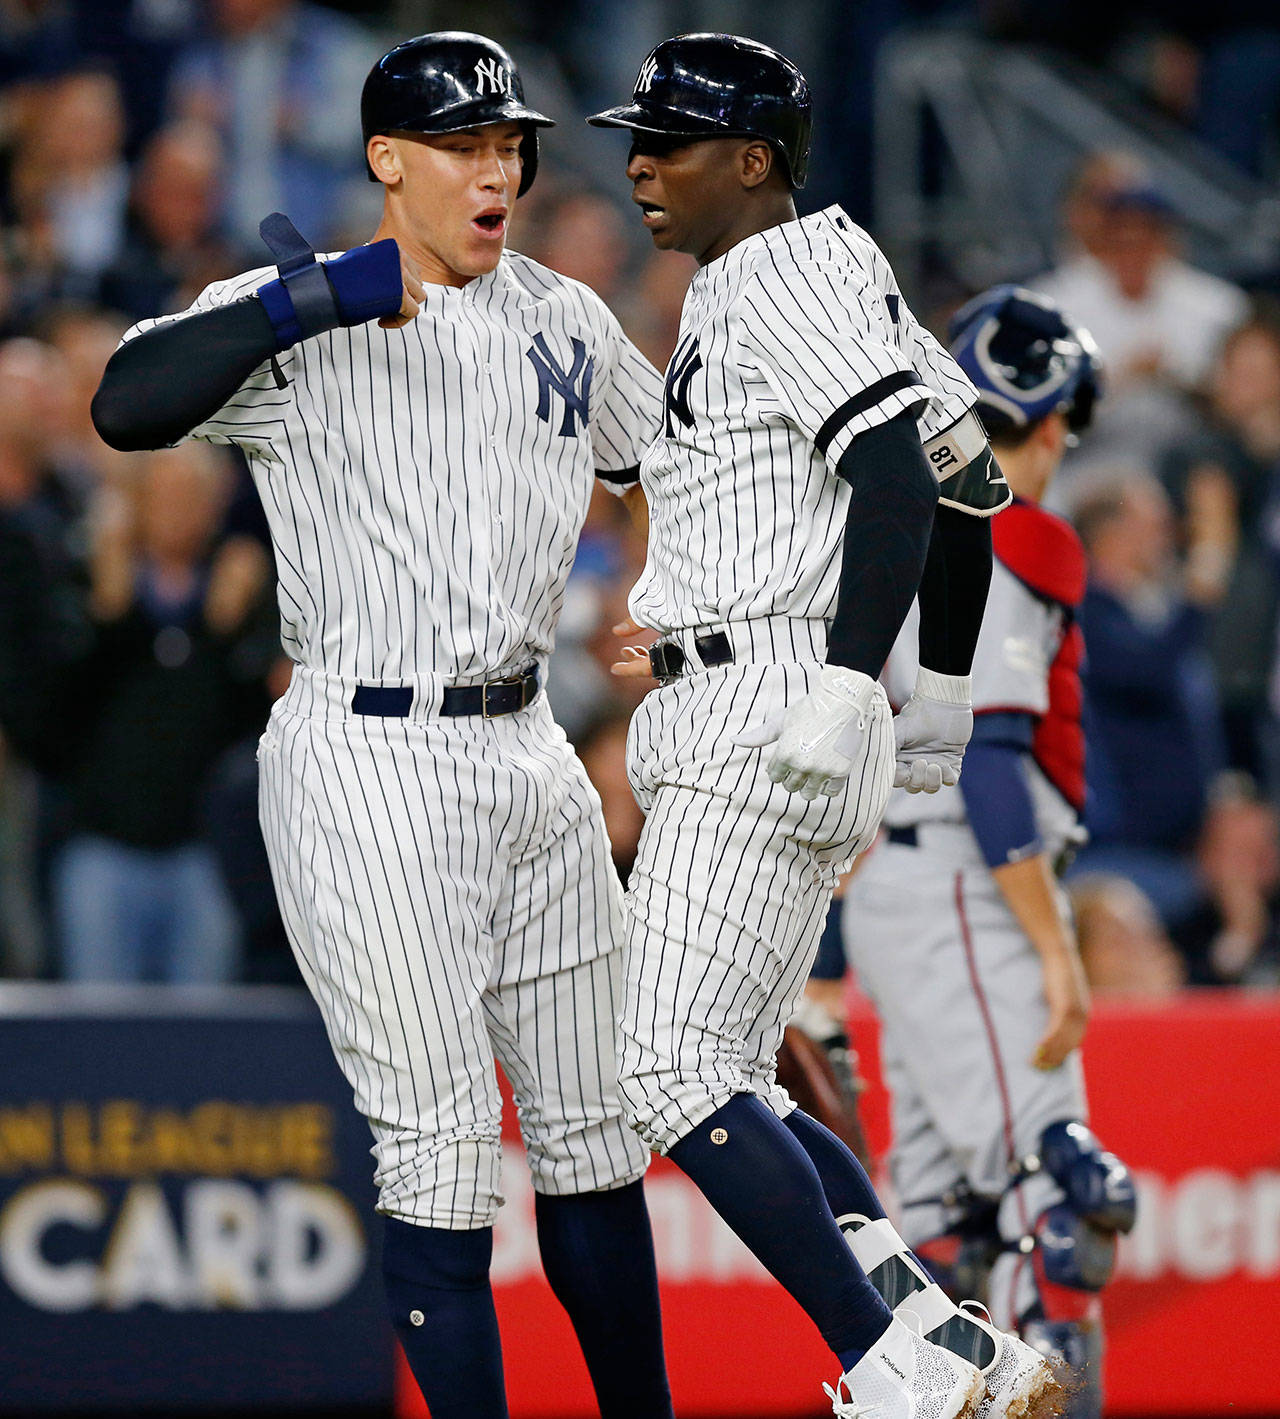 The Yankees’ Aaron Judge (left) and Didi Gregorius celebrate at the plate after Judge scored on Gregorius’ first-inning, three-run home run in the American League wild-card game against the Twins on Oct. 3, 2017, in New York. (AP Photo/Kathy Willens)